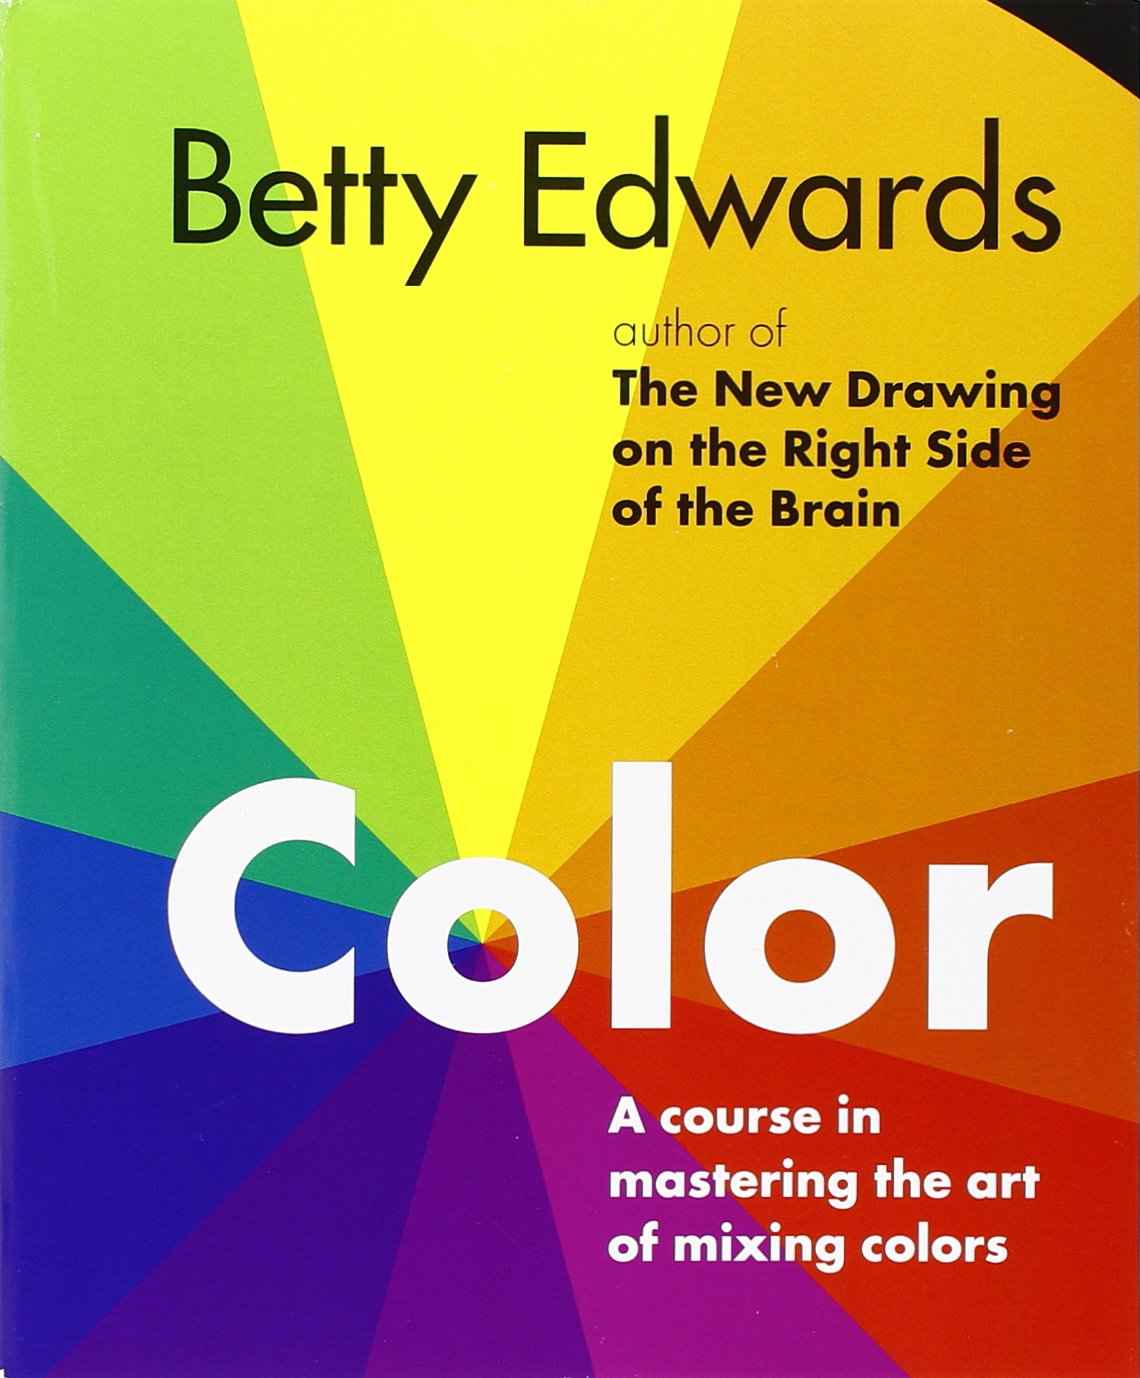 Edwards Book Cover